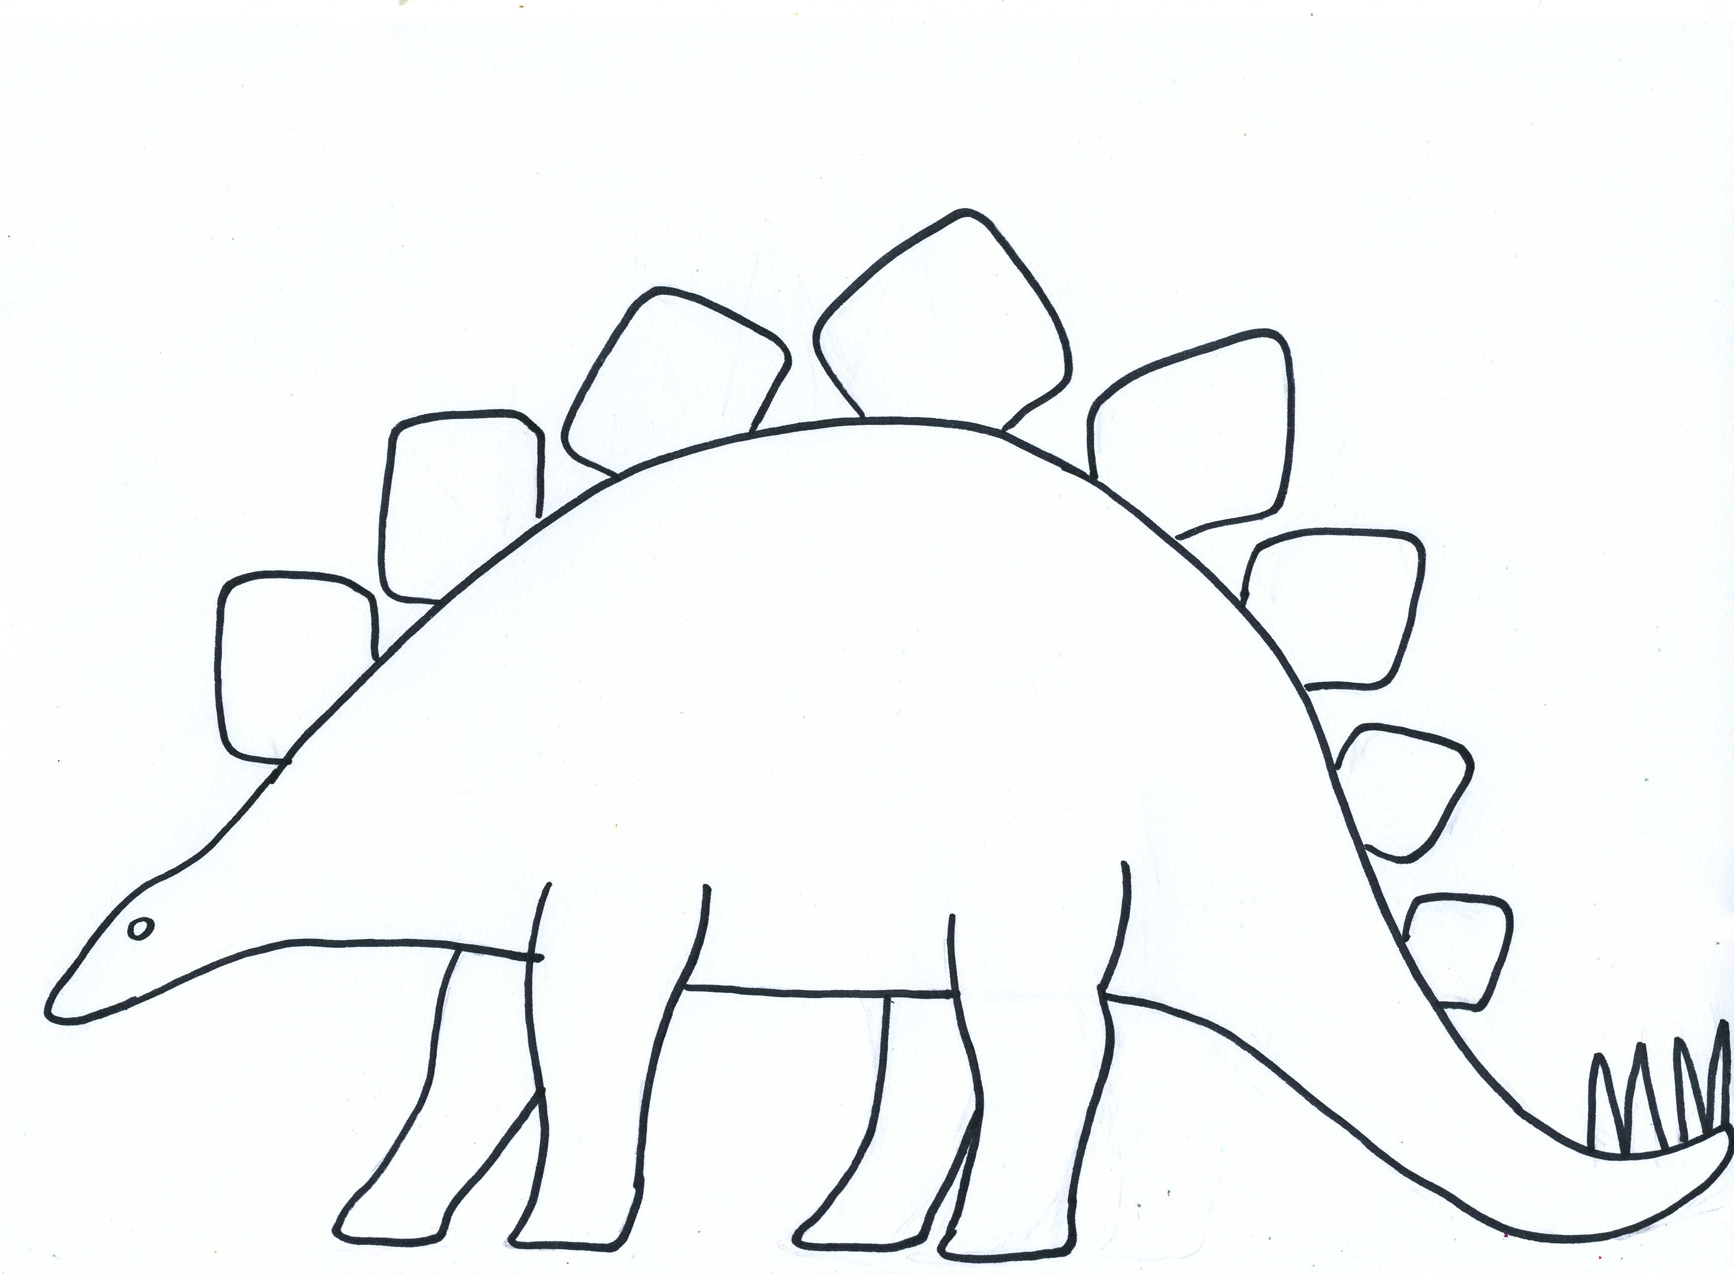 Dinosaur Outline Template Cliparts.co